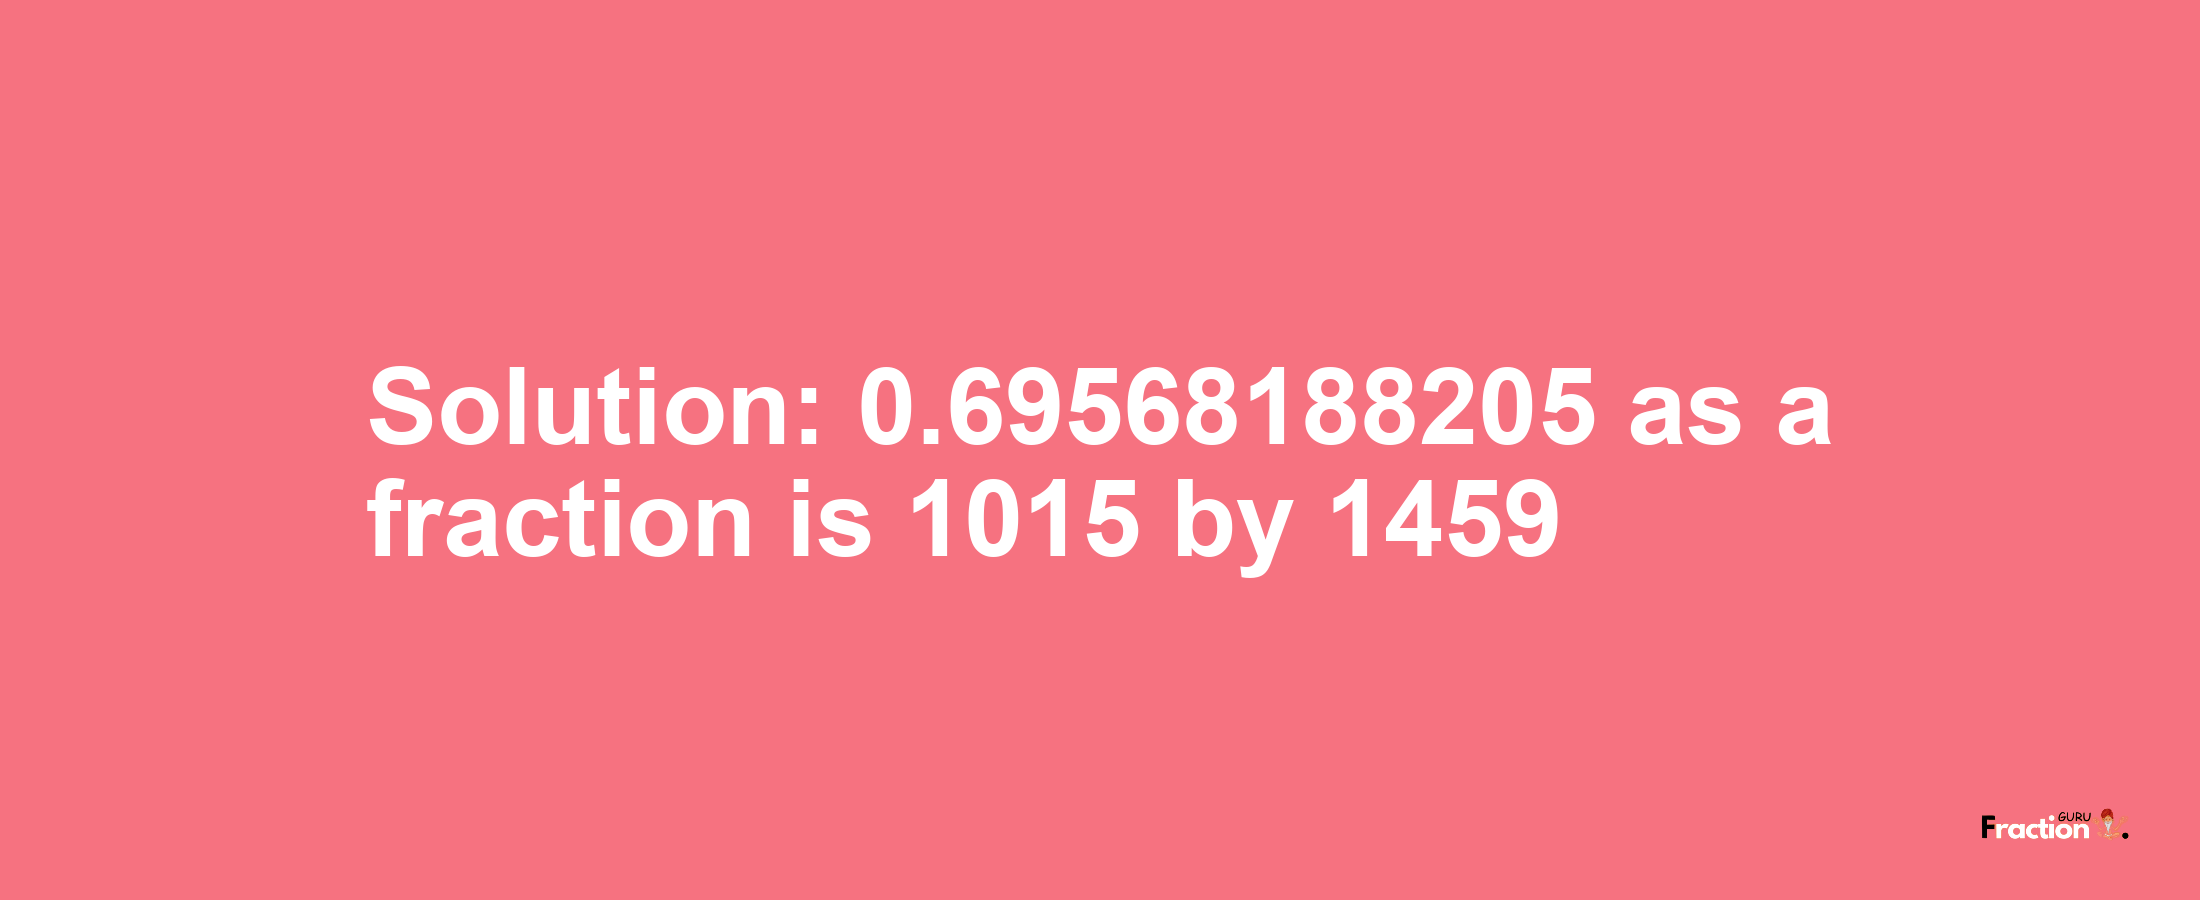 Solution:0.69568188205 as a fraction is 1015/1459